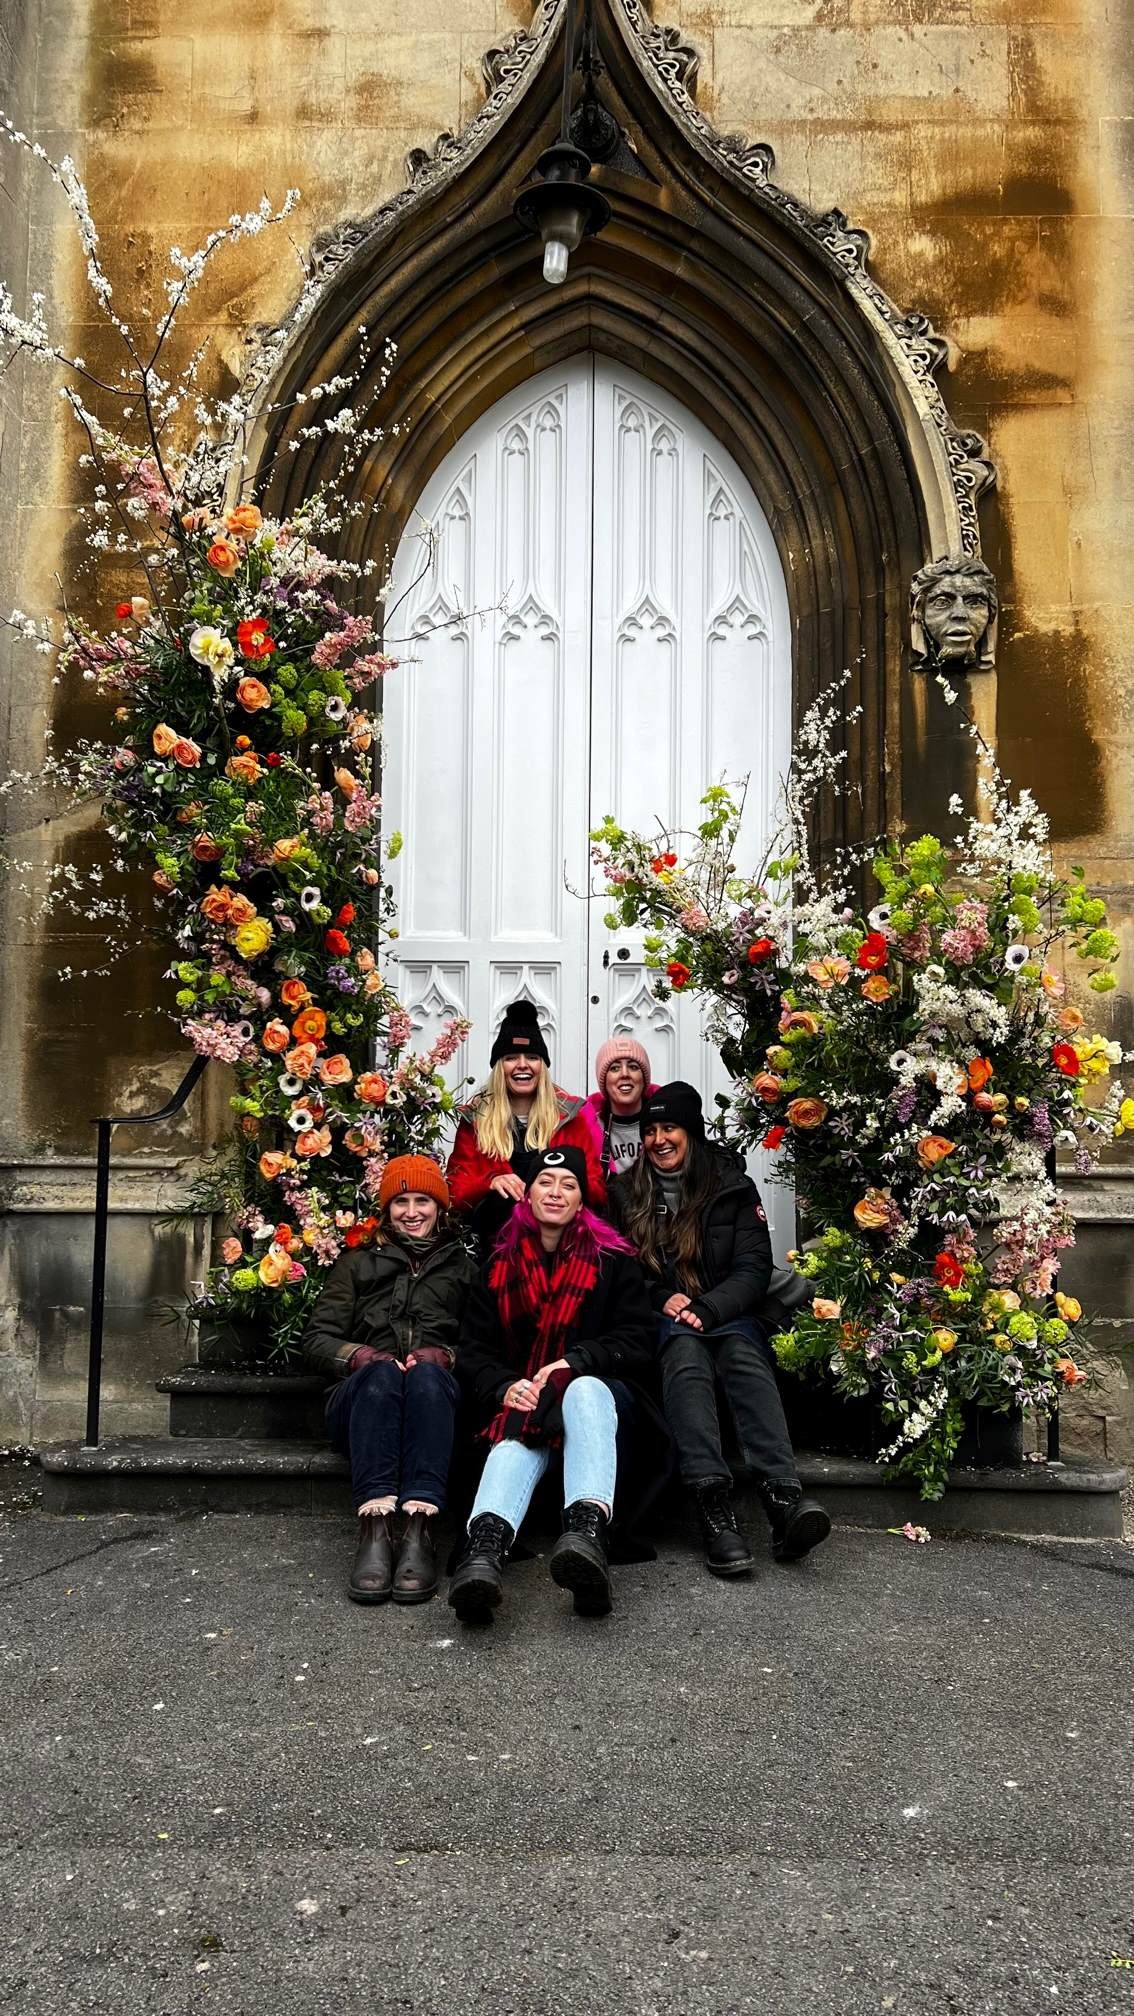 Students gathered in front of their professional floristry installation